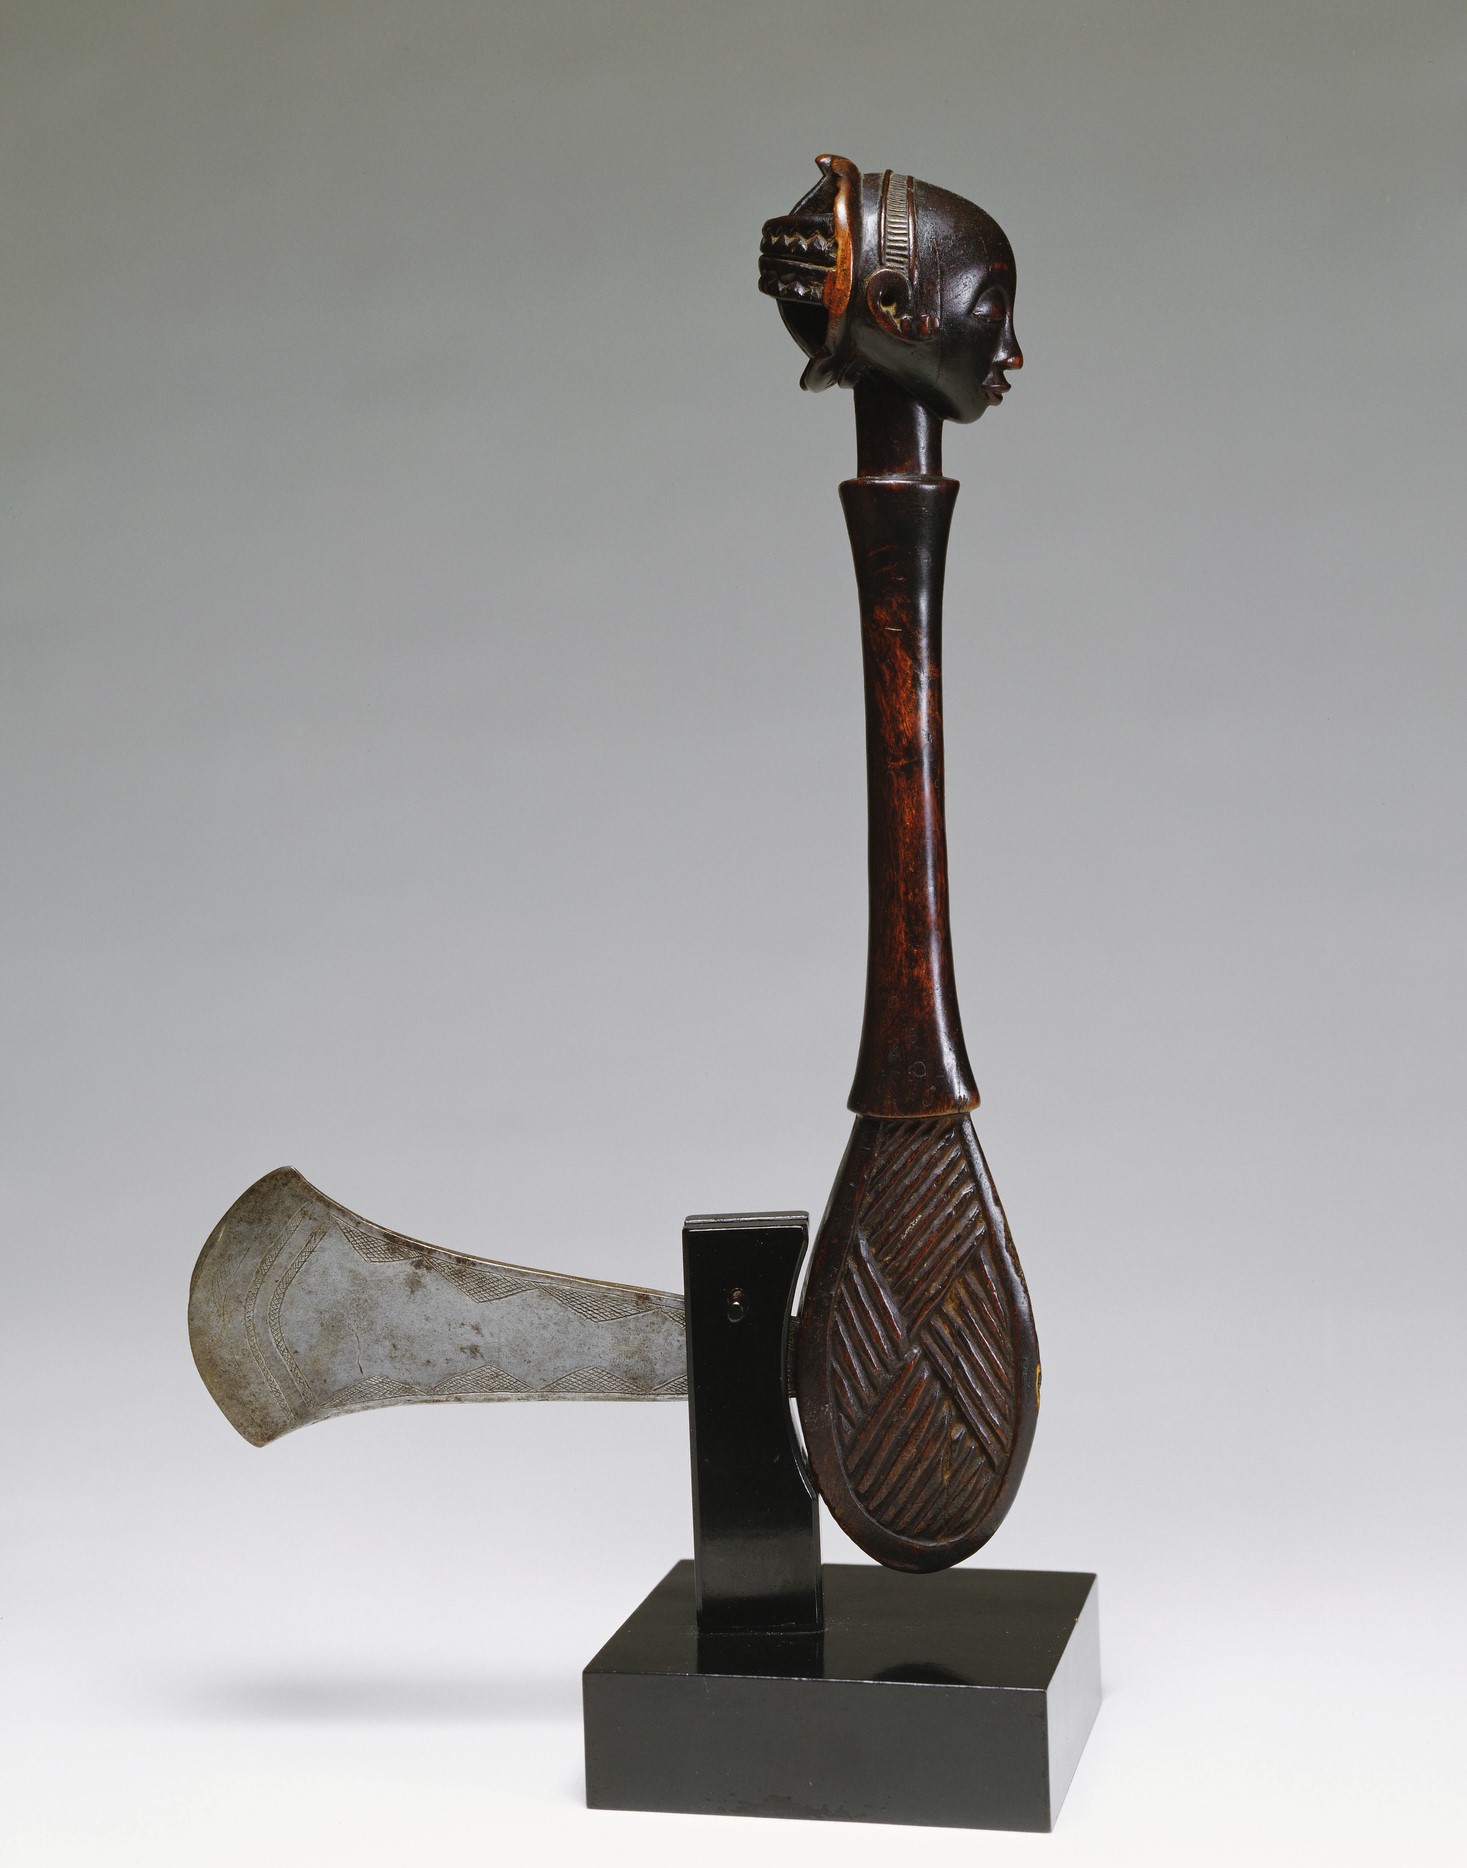 An axe with a wooden handle in the shape of a woman's head and neck